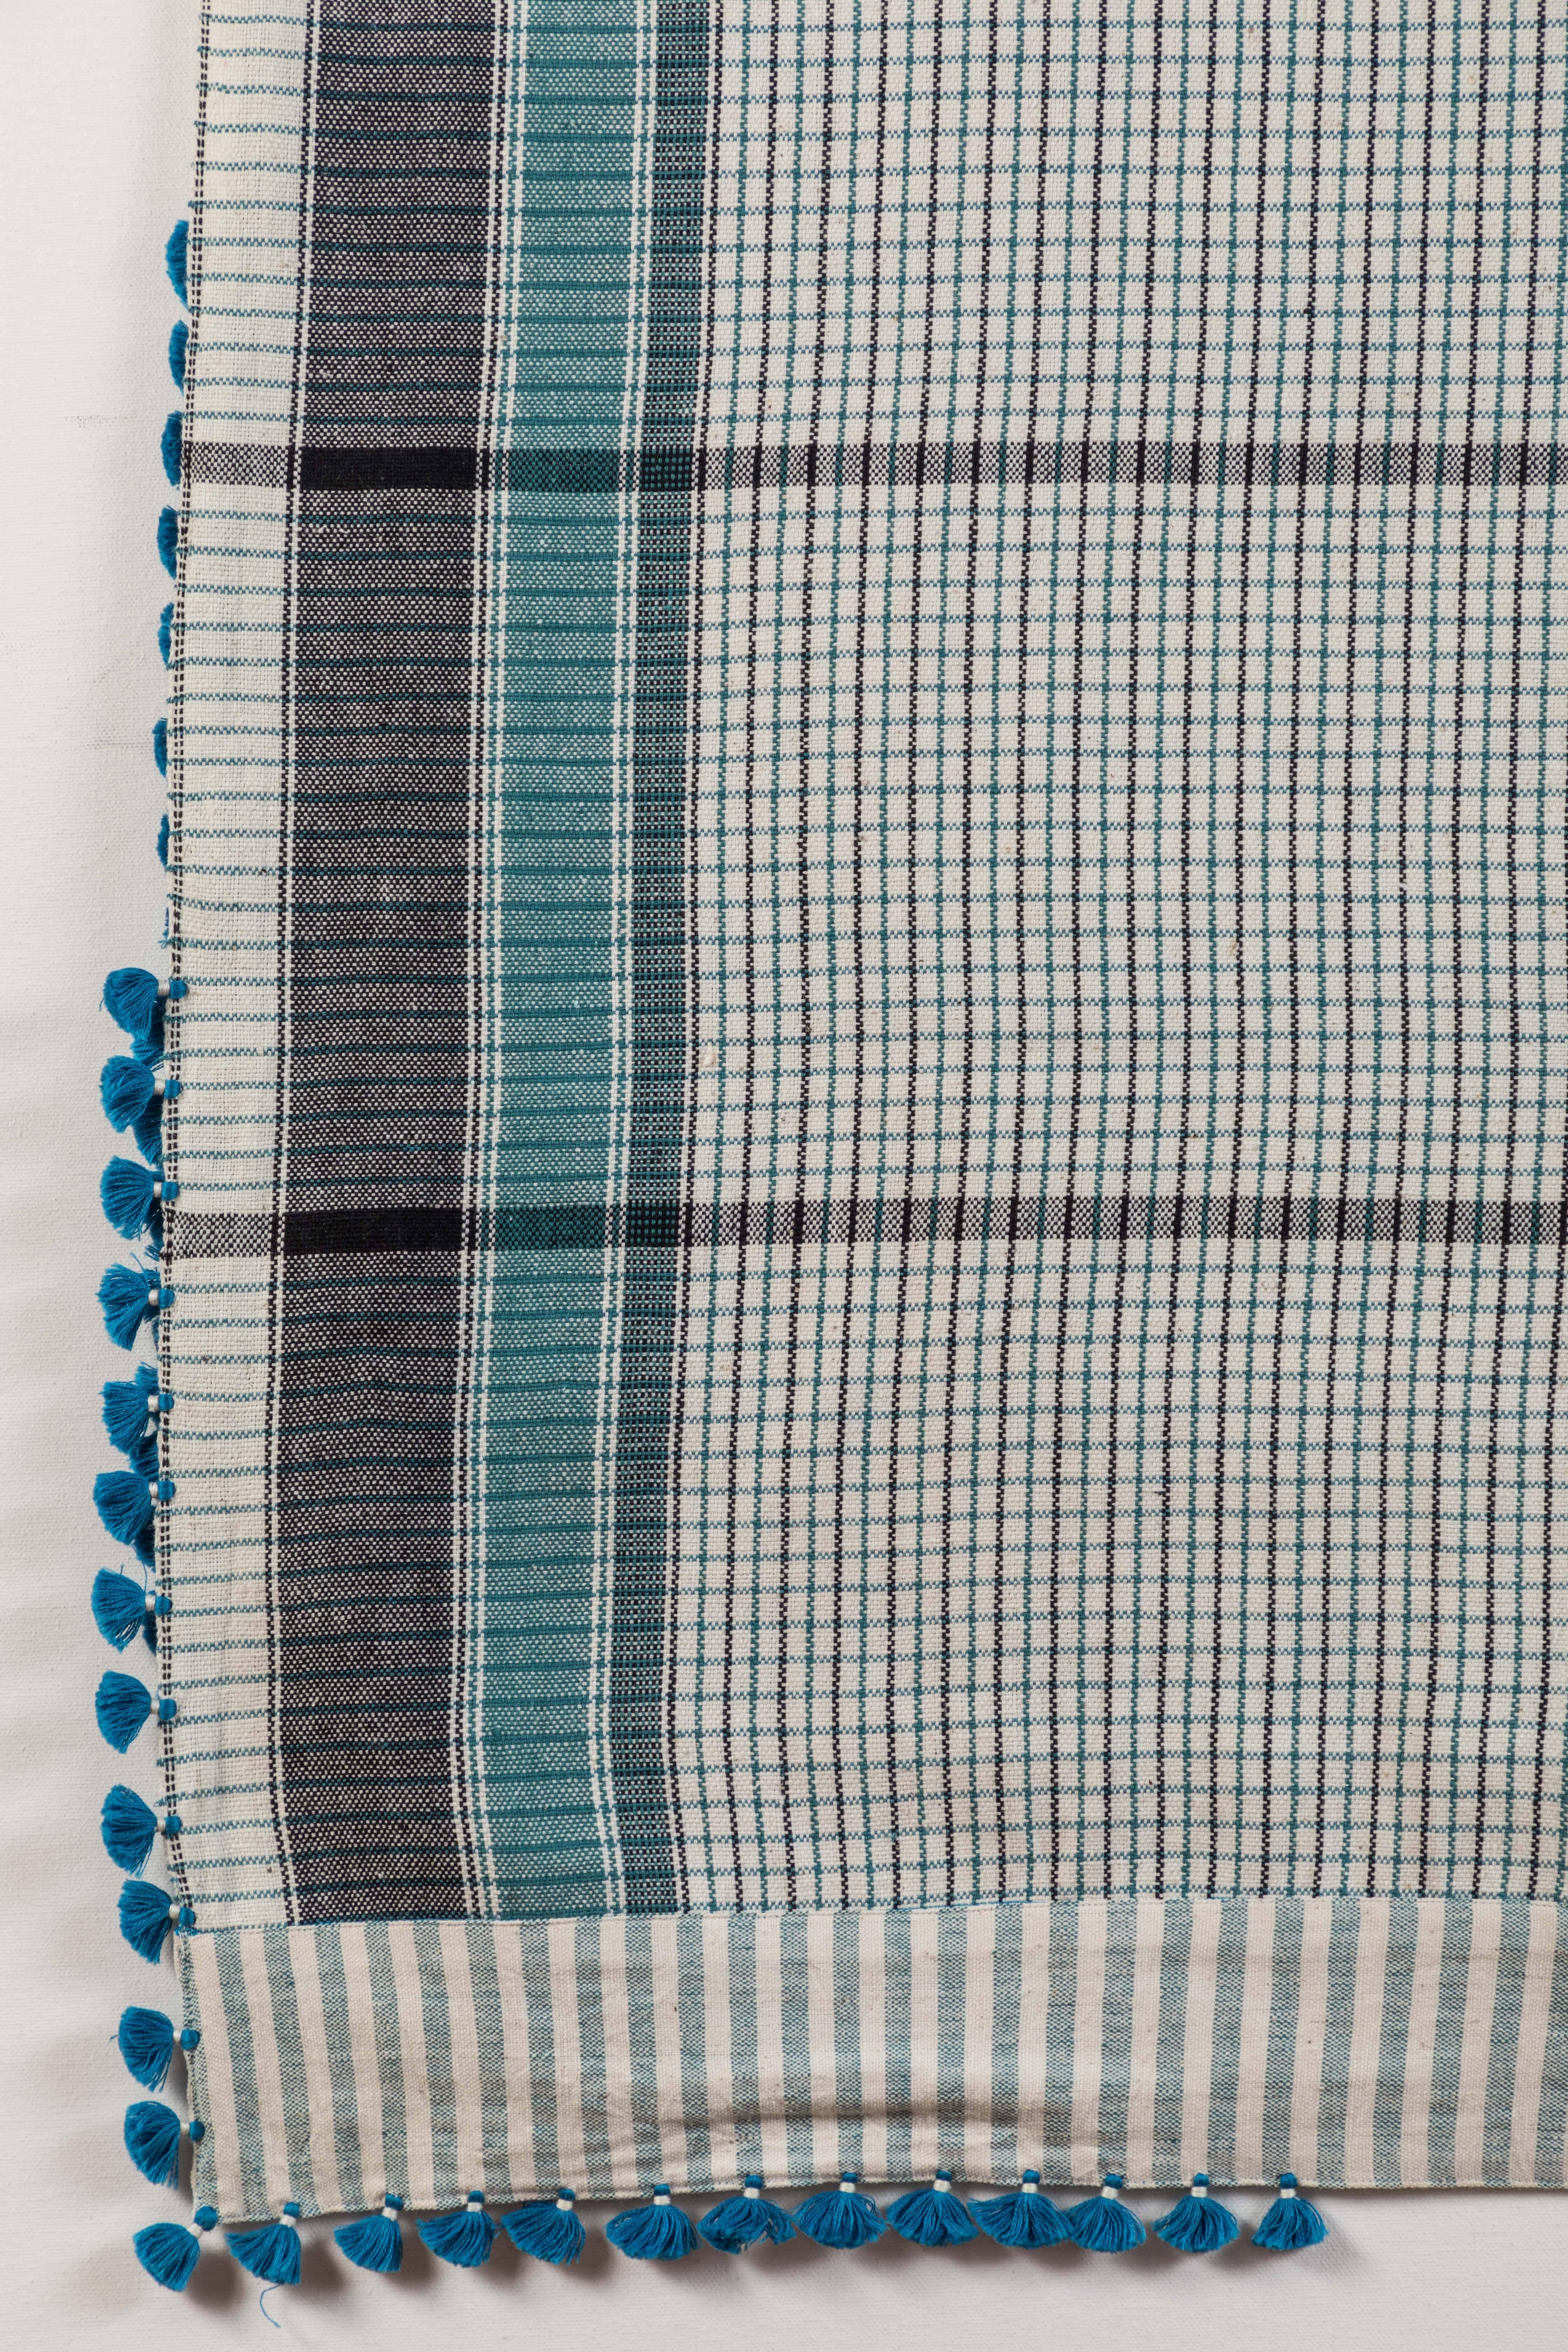 Kala naturally dyed organic cotton from Gujarat, India.   Hand-loomed using traditional Indian textile techniques to produce extra weft woven stripes and plaids.   This turquoise blue, grey, white and black bedcover/throw has added hand-knotted